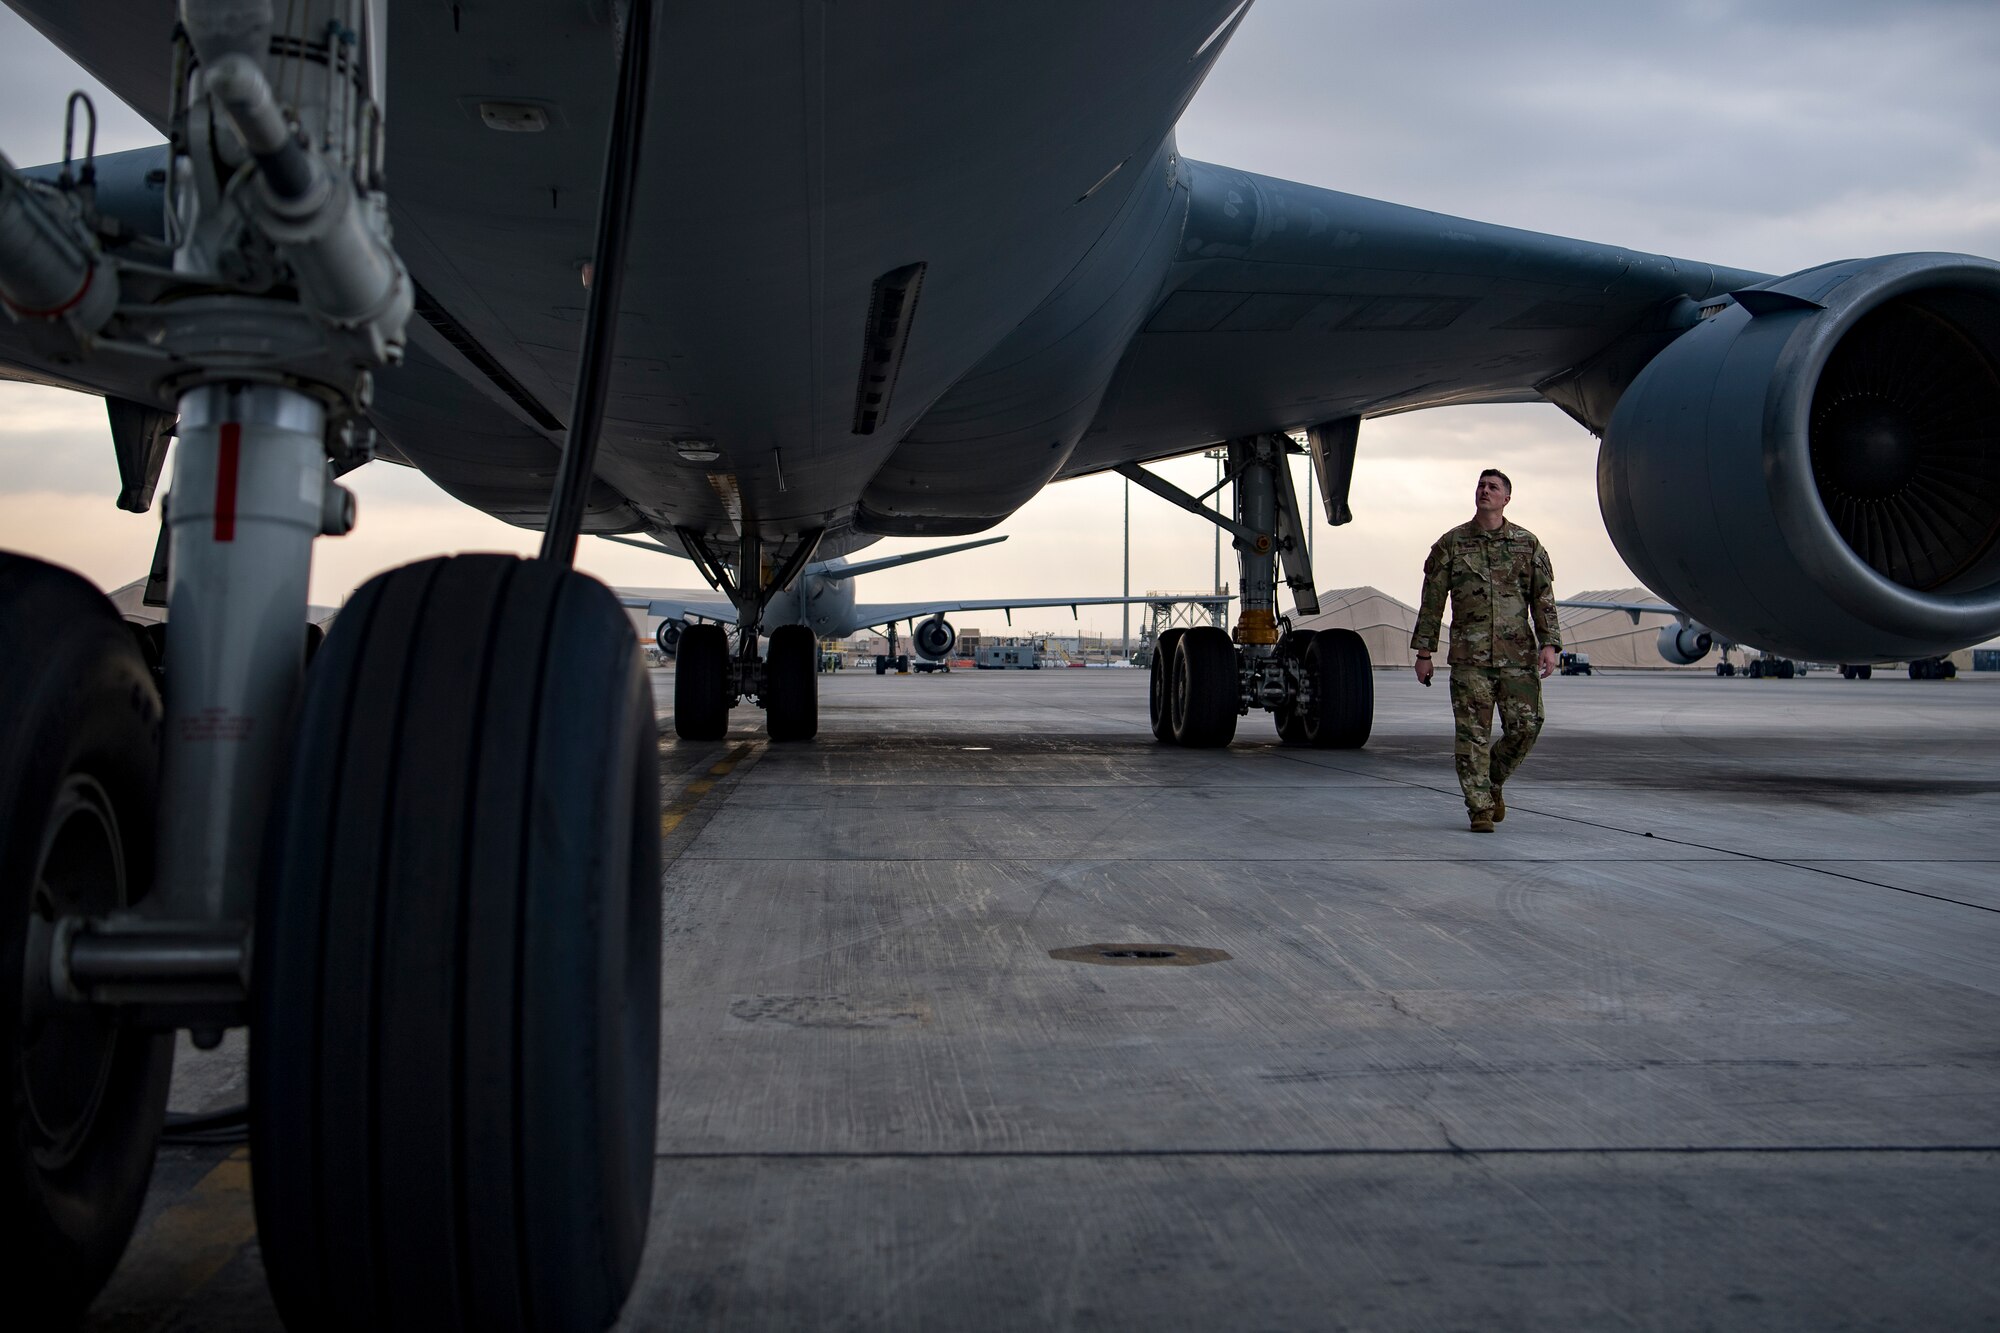 A U.S. Air Force flight engineer assigned to the 908th Expeditionary Air Refueling Squadron conducts preflight checks on a KC-10 Extender at Al Dhafra Air Base, United Arab Emirates, Jan. 13, 2020.